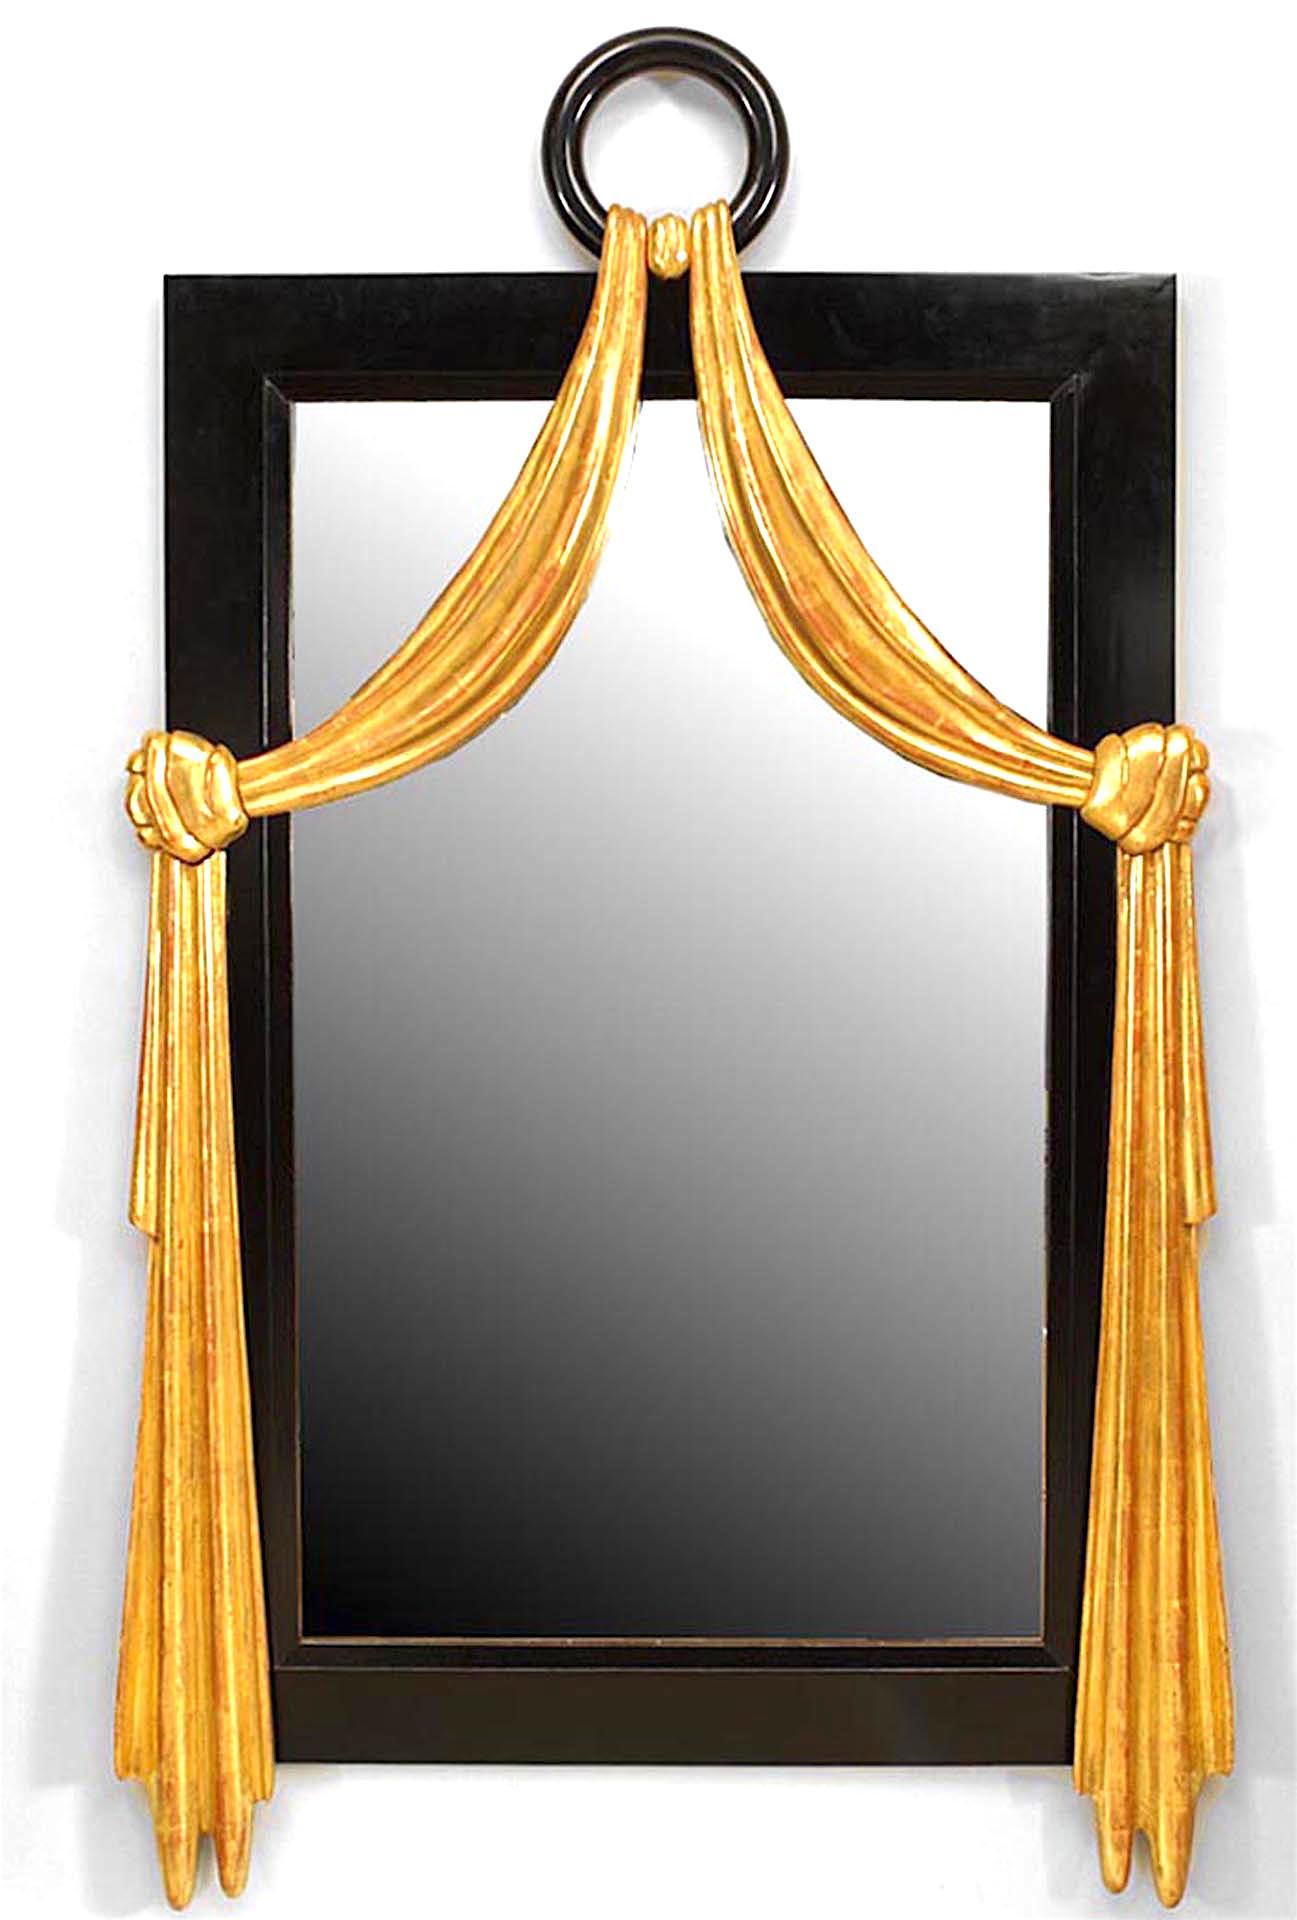 French Mid-Century (1940s) ebonized vertical wall mirror with gilt swag design and a ring pediment top.
